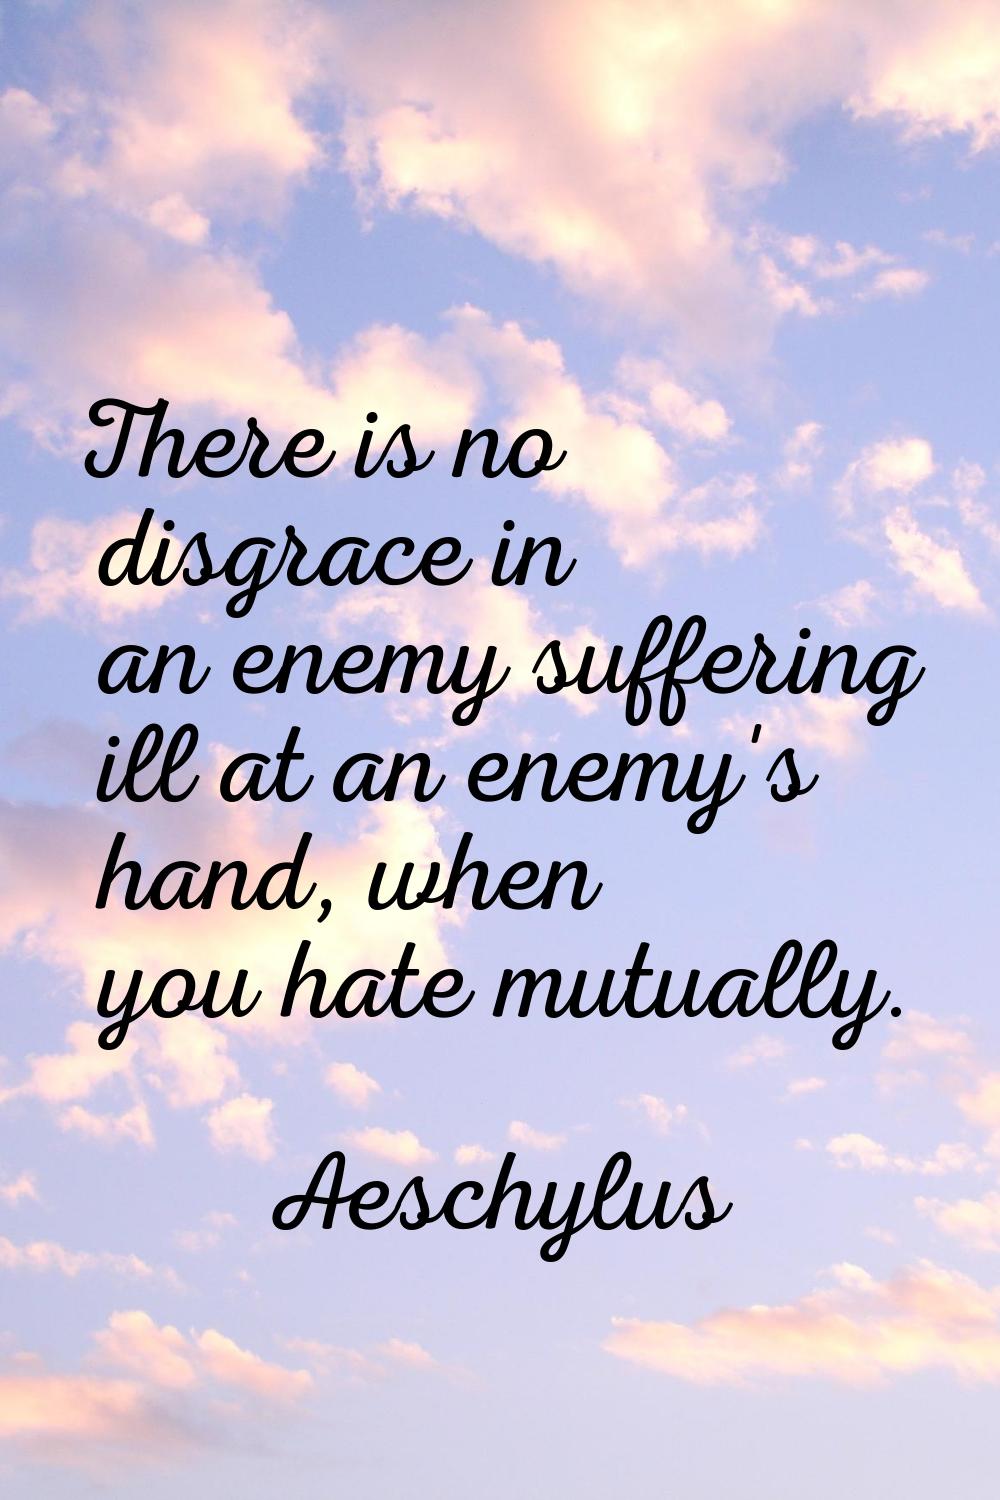 There is no disgrace in an enemy suffering ill at an enemy's hand, when you hate mutually.